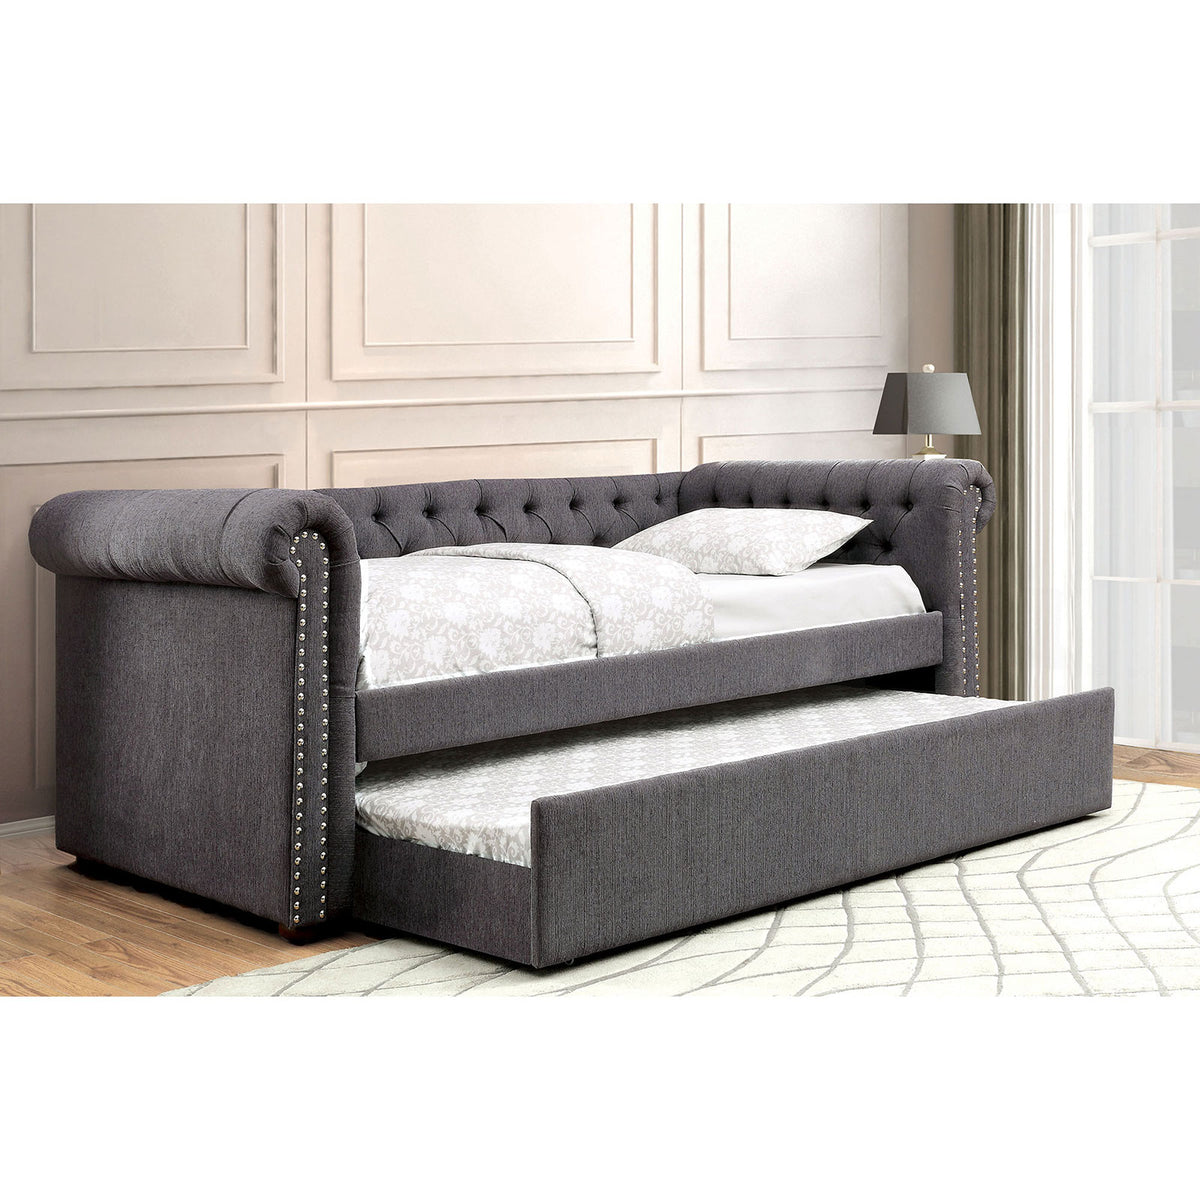 LEANNA Gray Daybed w/ Trundle, Gray - Half Price Furniture